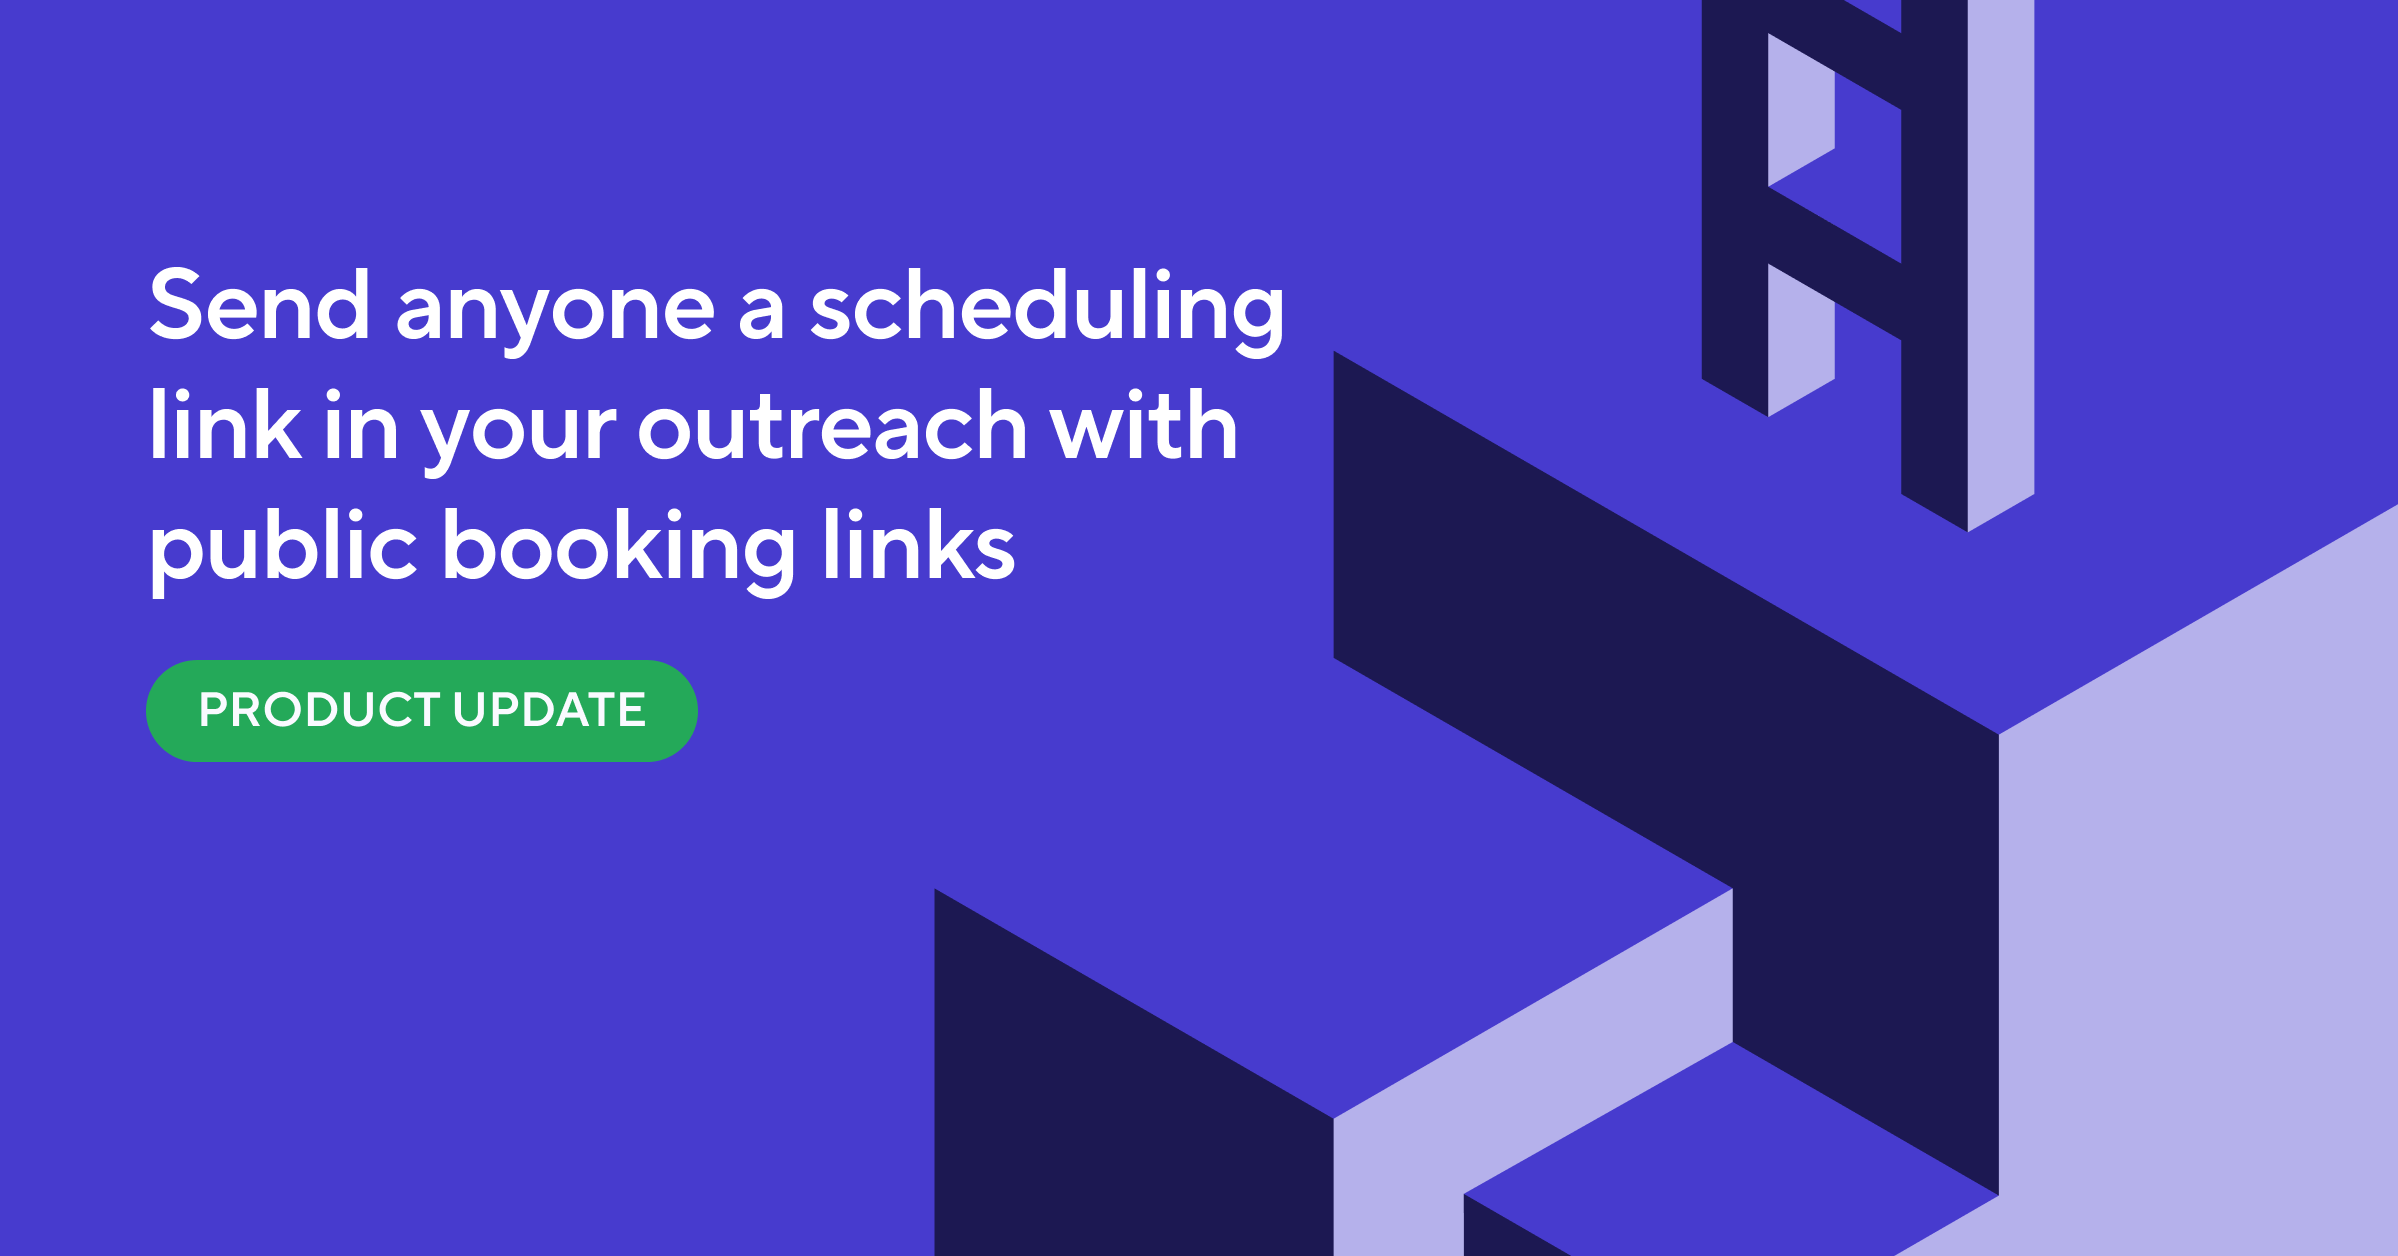 New Feature: Schedule an Interview With Anyone Using Public Booking Links